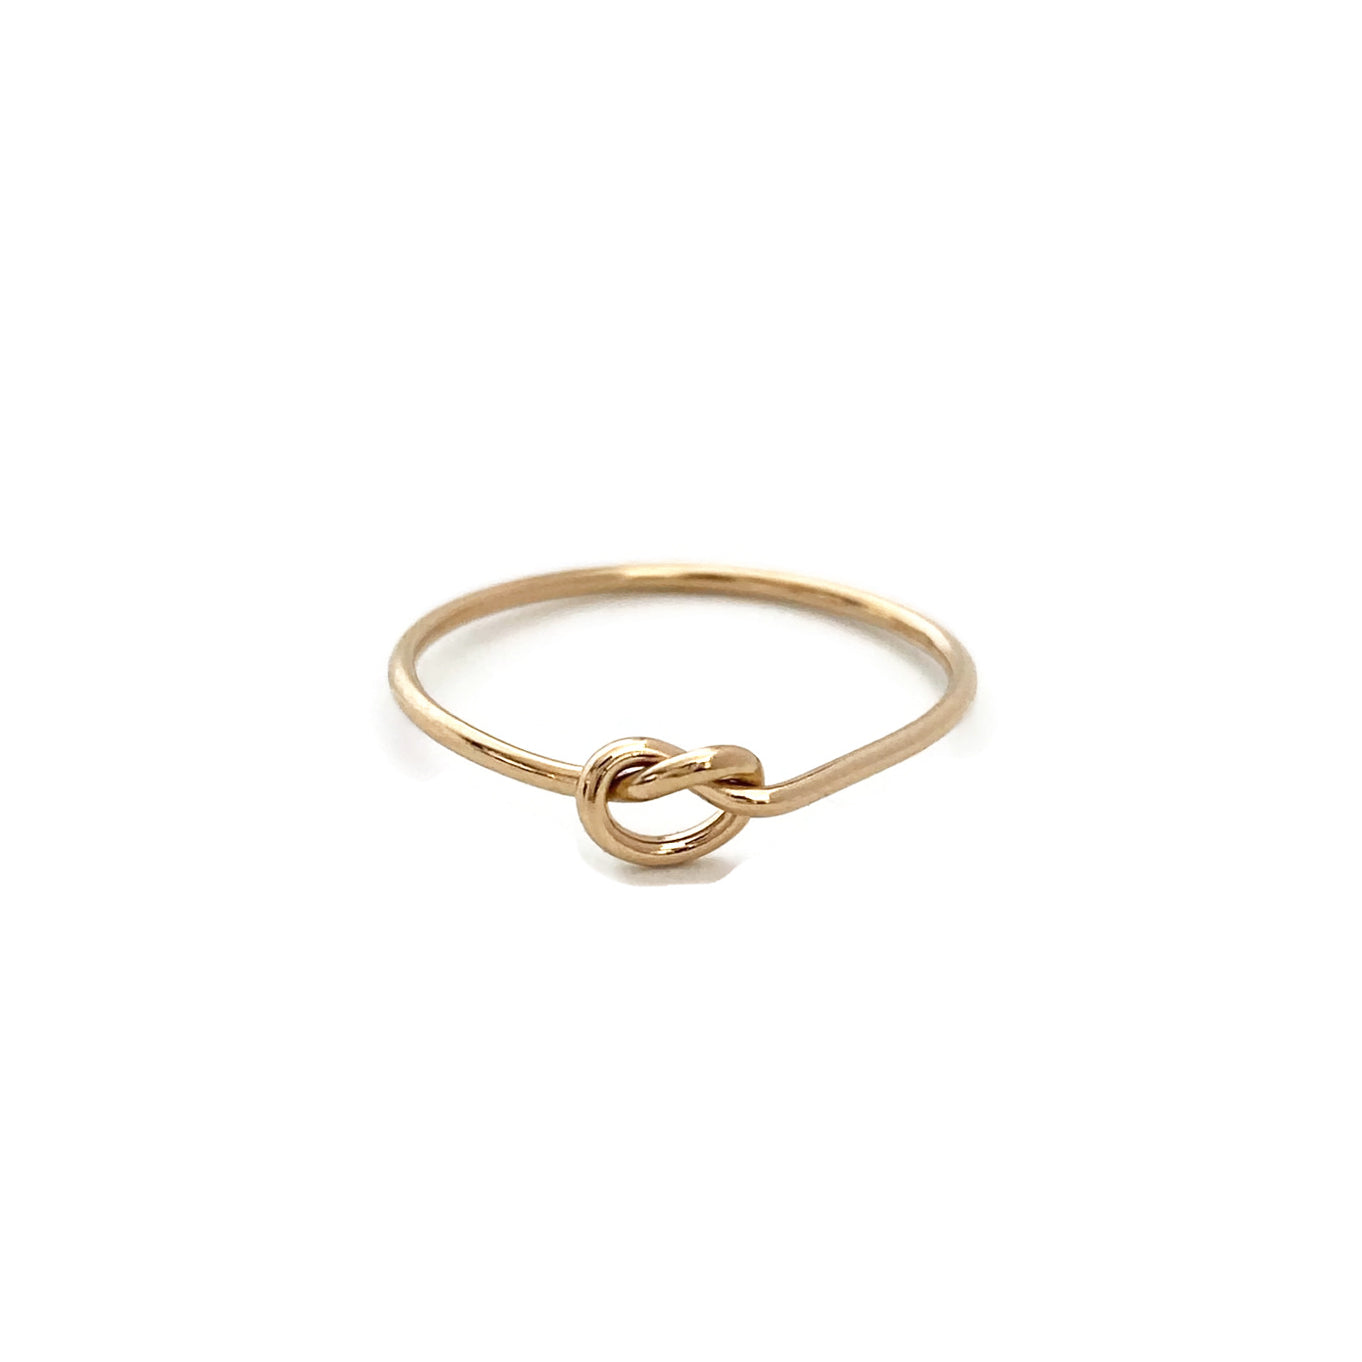 This dainty love knot ring is a cute ring that you can wear it for everyday.